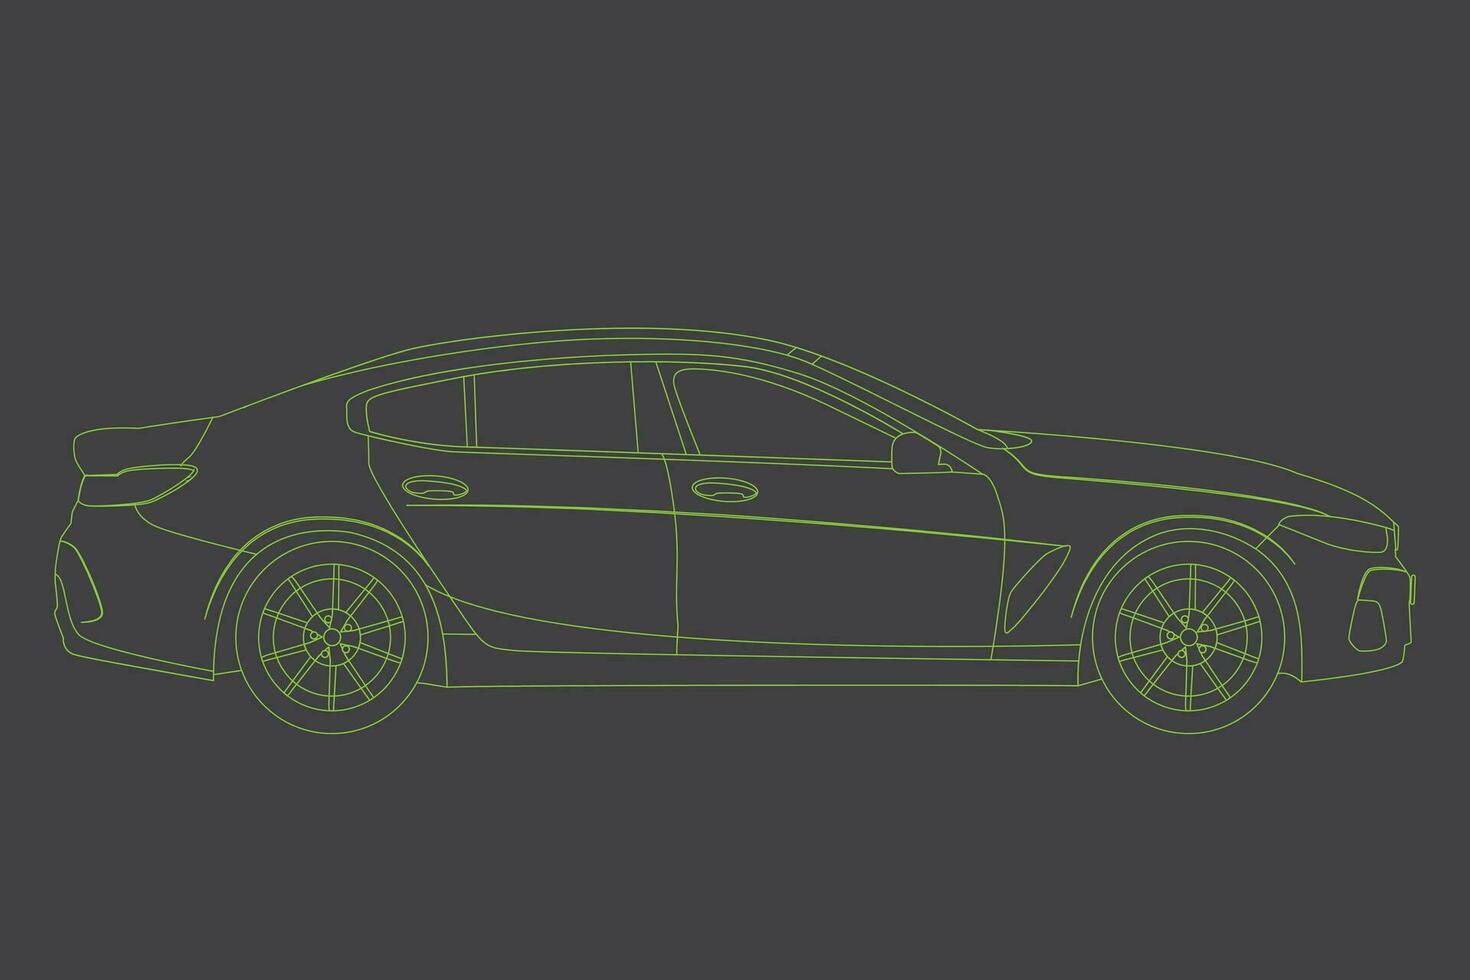 Set of modern car silhouettes, side view. green neon car frame side view, banner for marketing advertising design. Vector illustration. Isolated on black background.